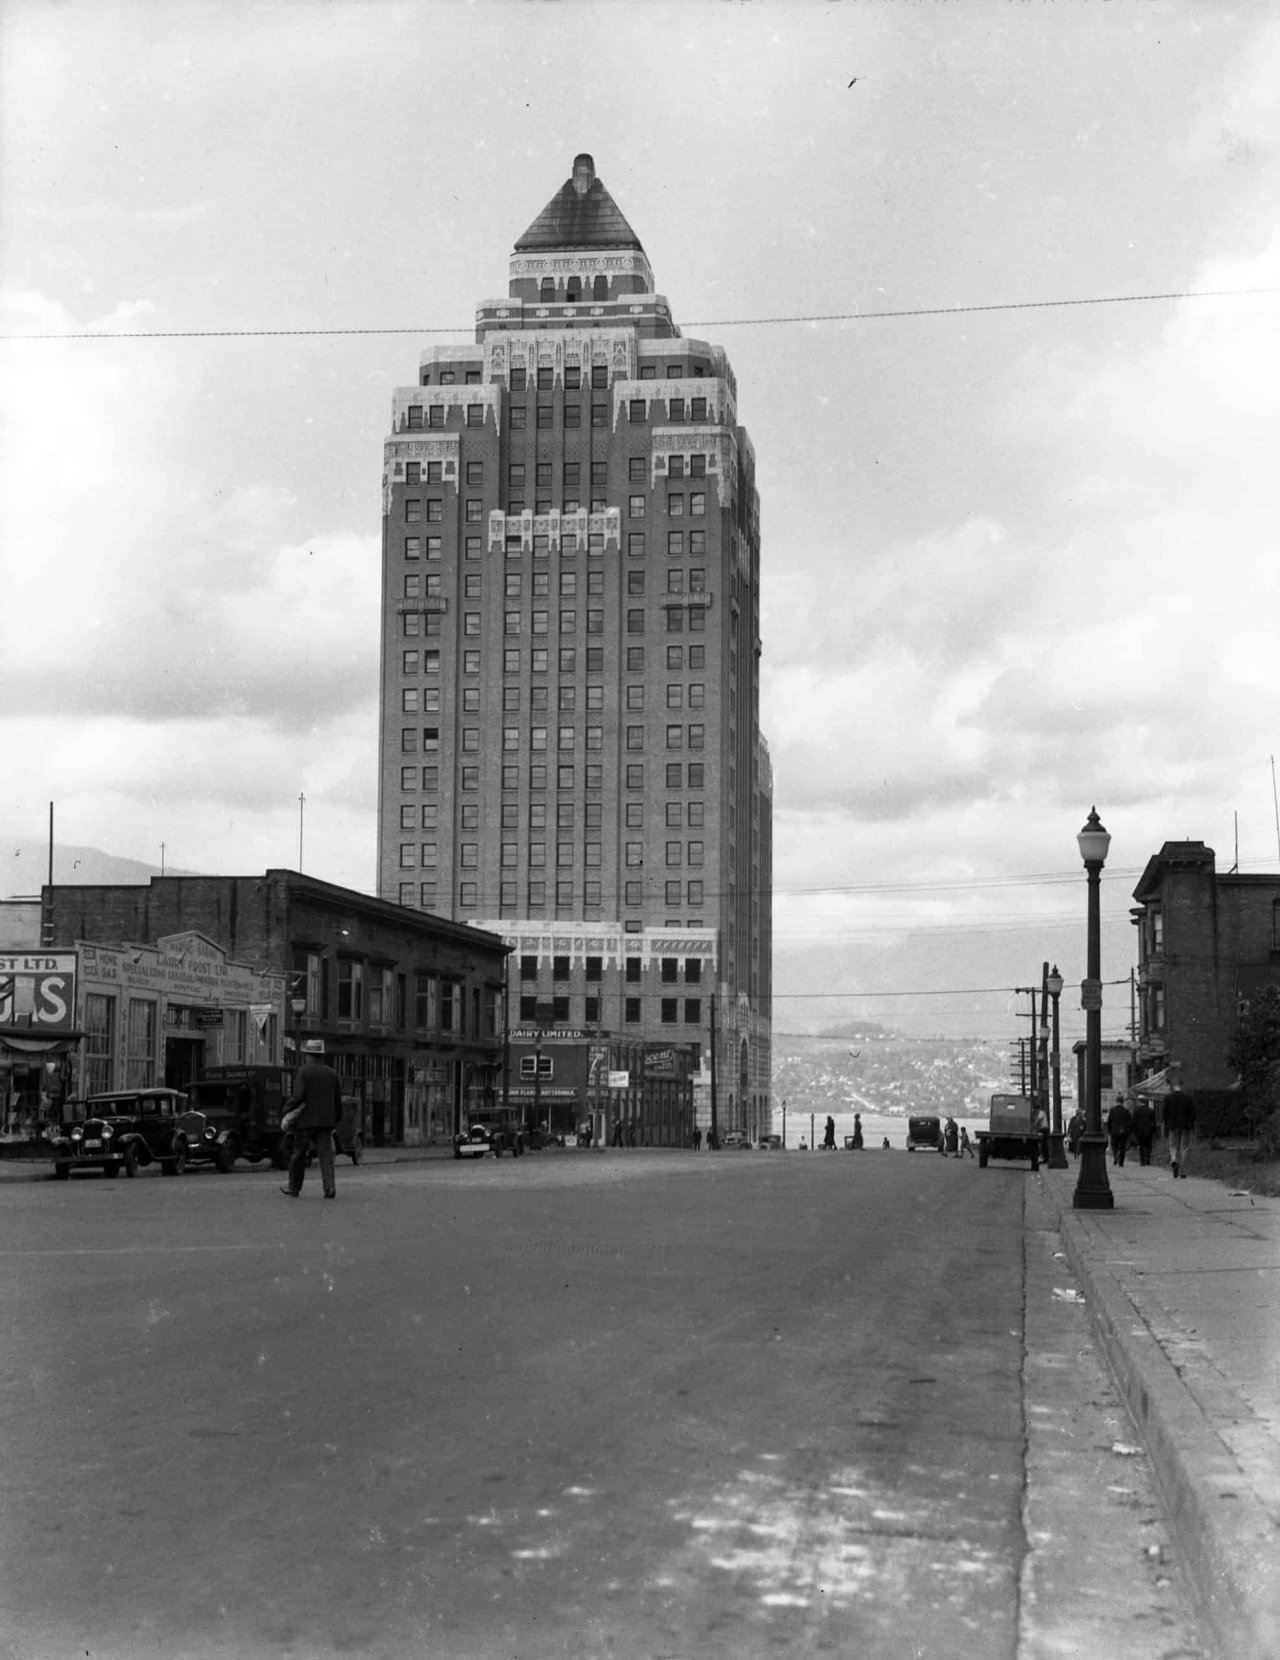 View of the Marine Building from Burrard Street, 1930. City of Vancouver Archives, CVA 239-21